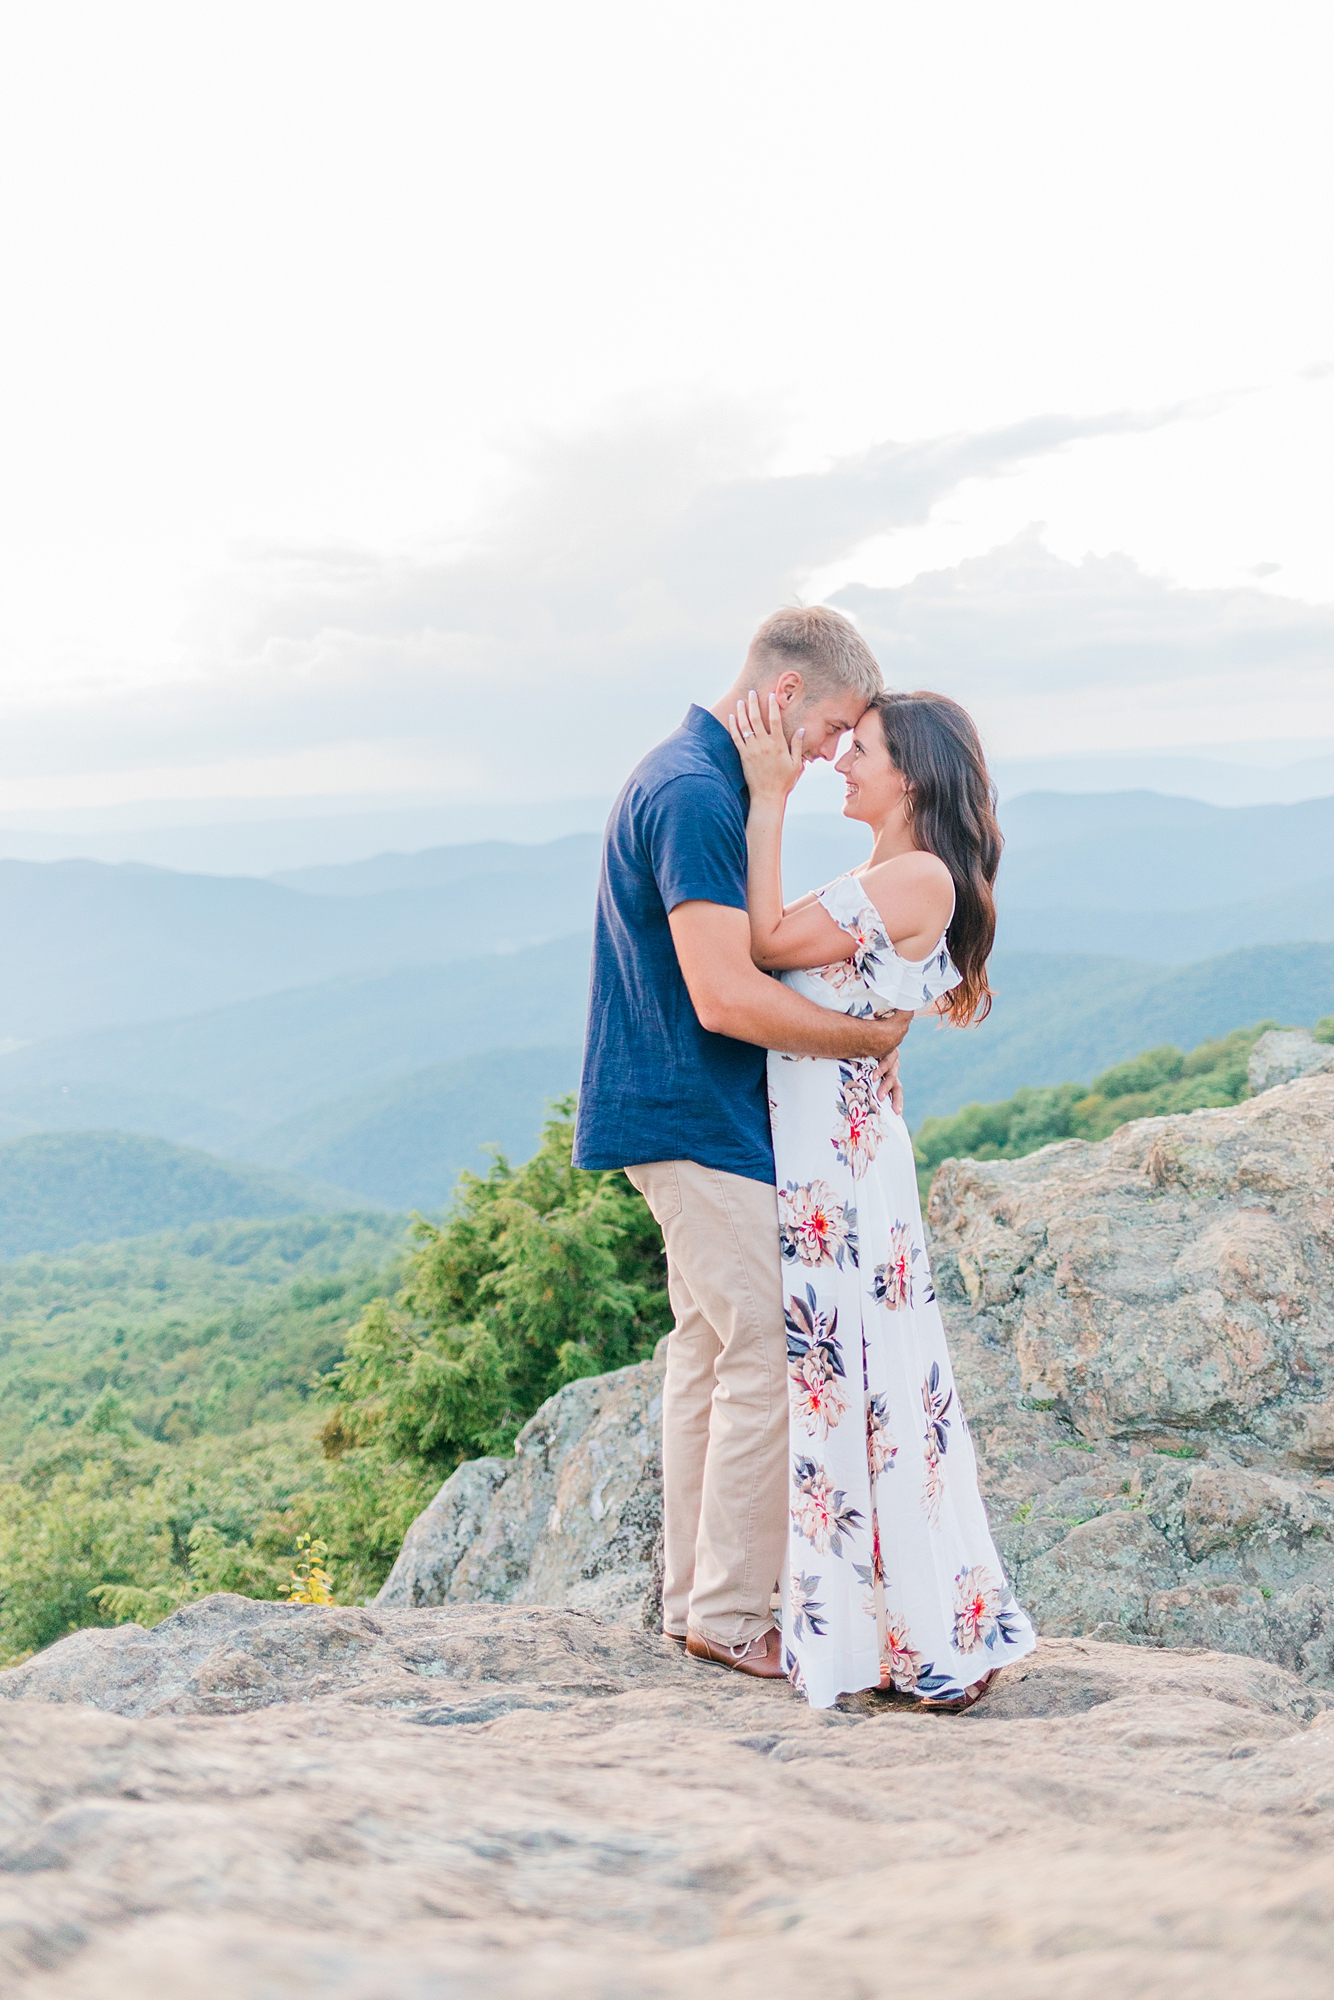 Engagement session in Blue Ridge Mountains.